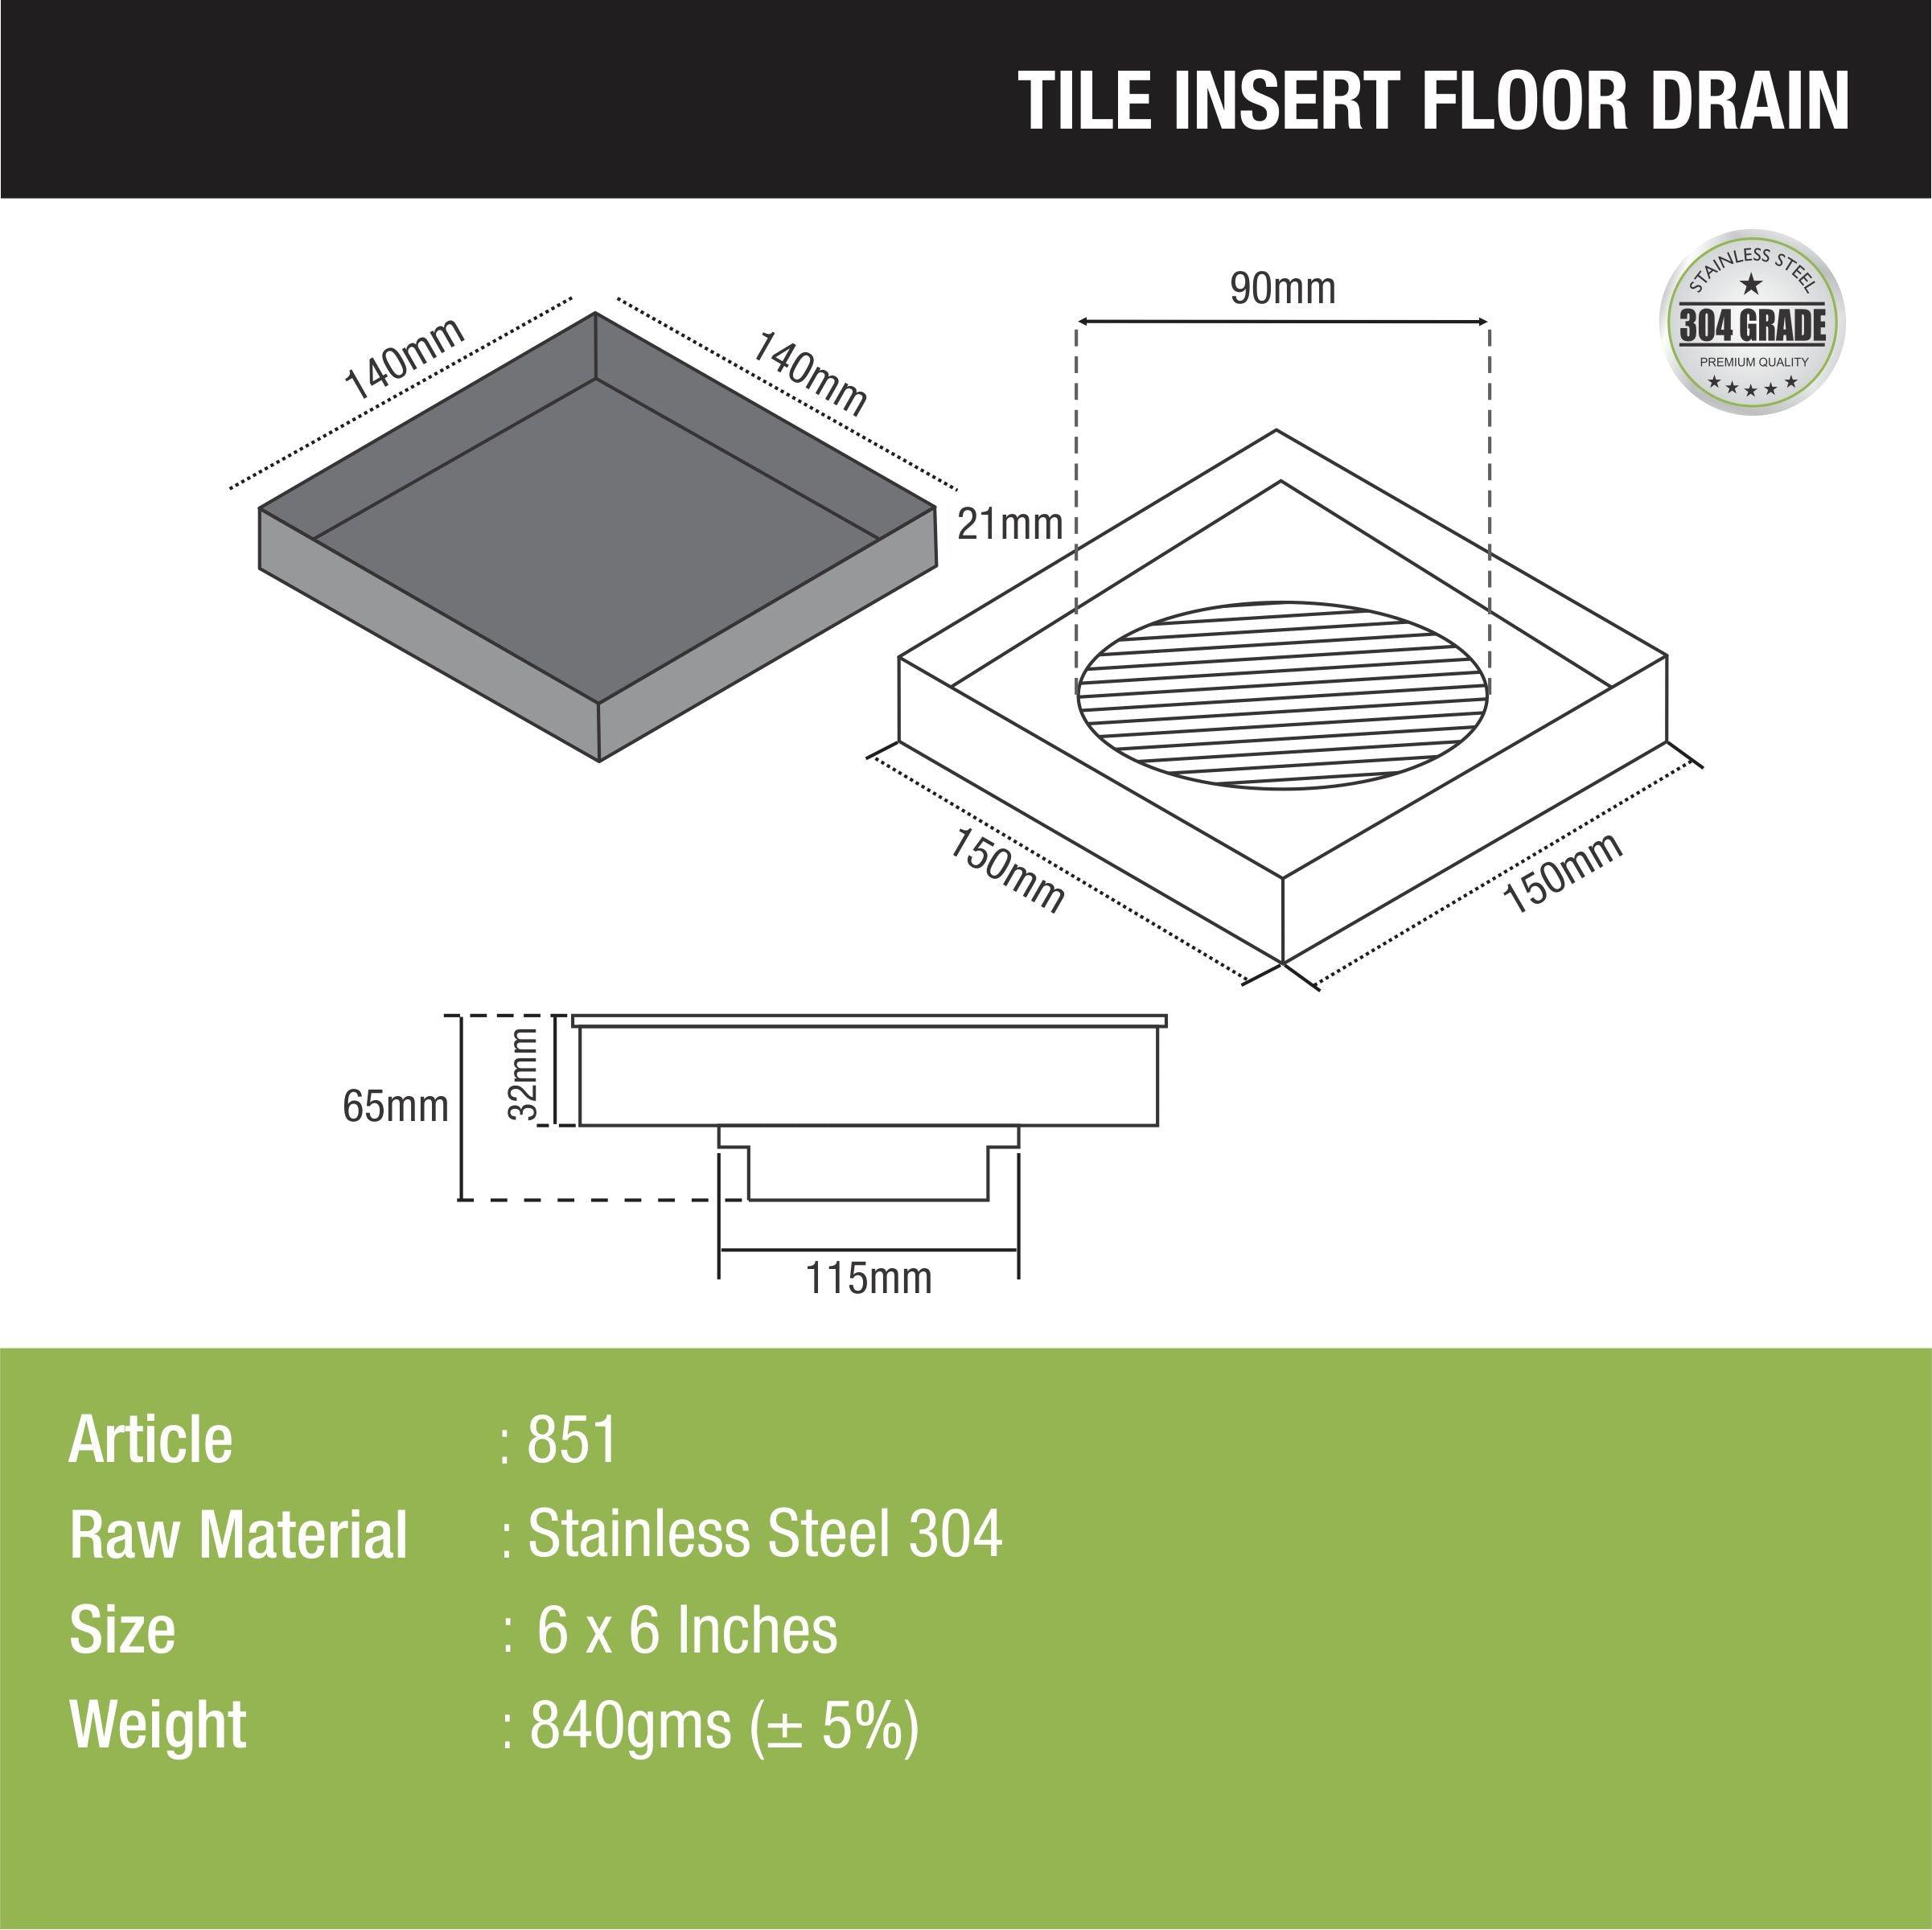 Tile Insert Floor Drain (6 x 6 Inches) sizes and dimension